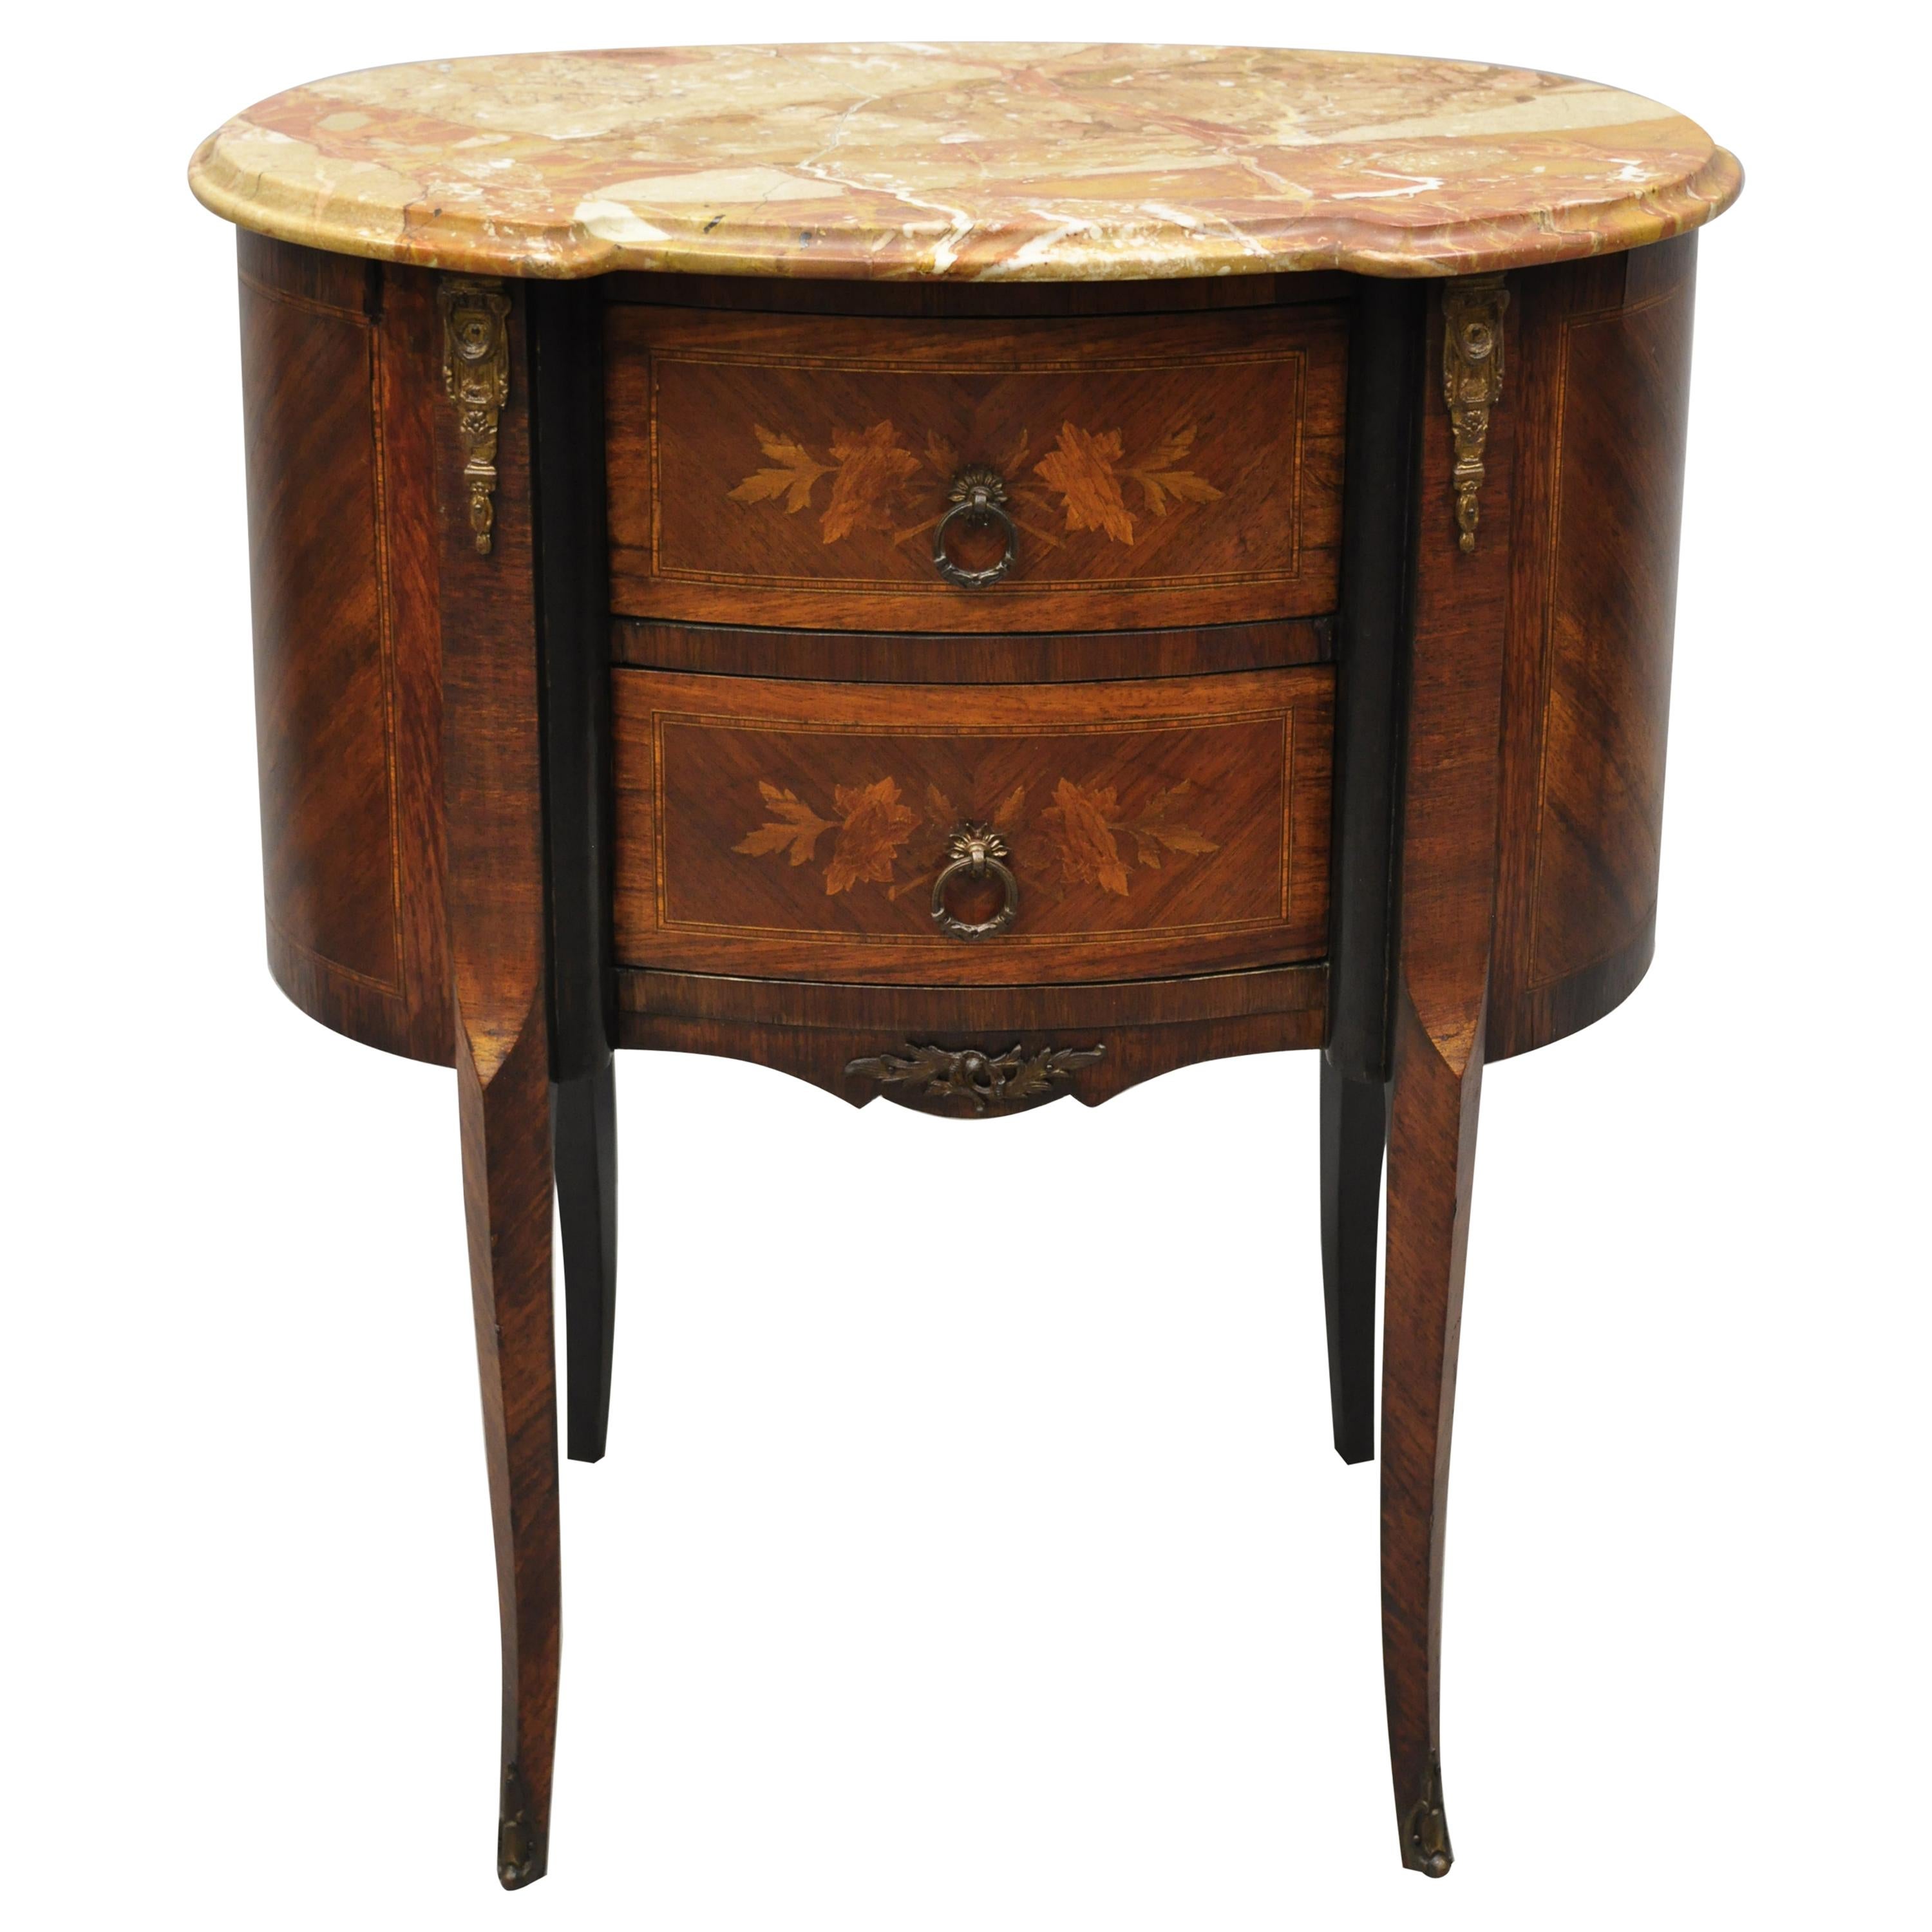 Antique French Louis XV Rogue Marble-Top Floral Inlay Bombe Nightstand Table